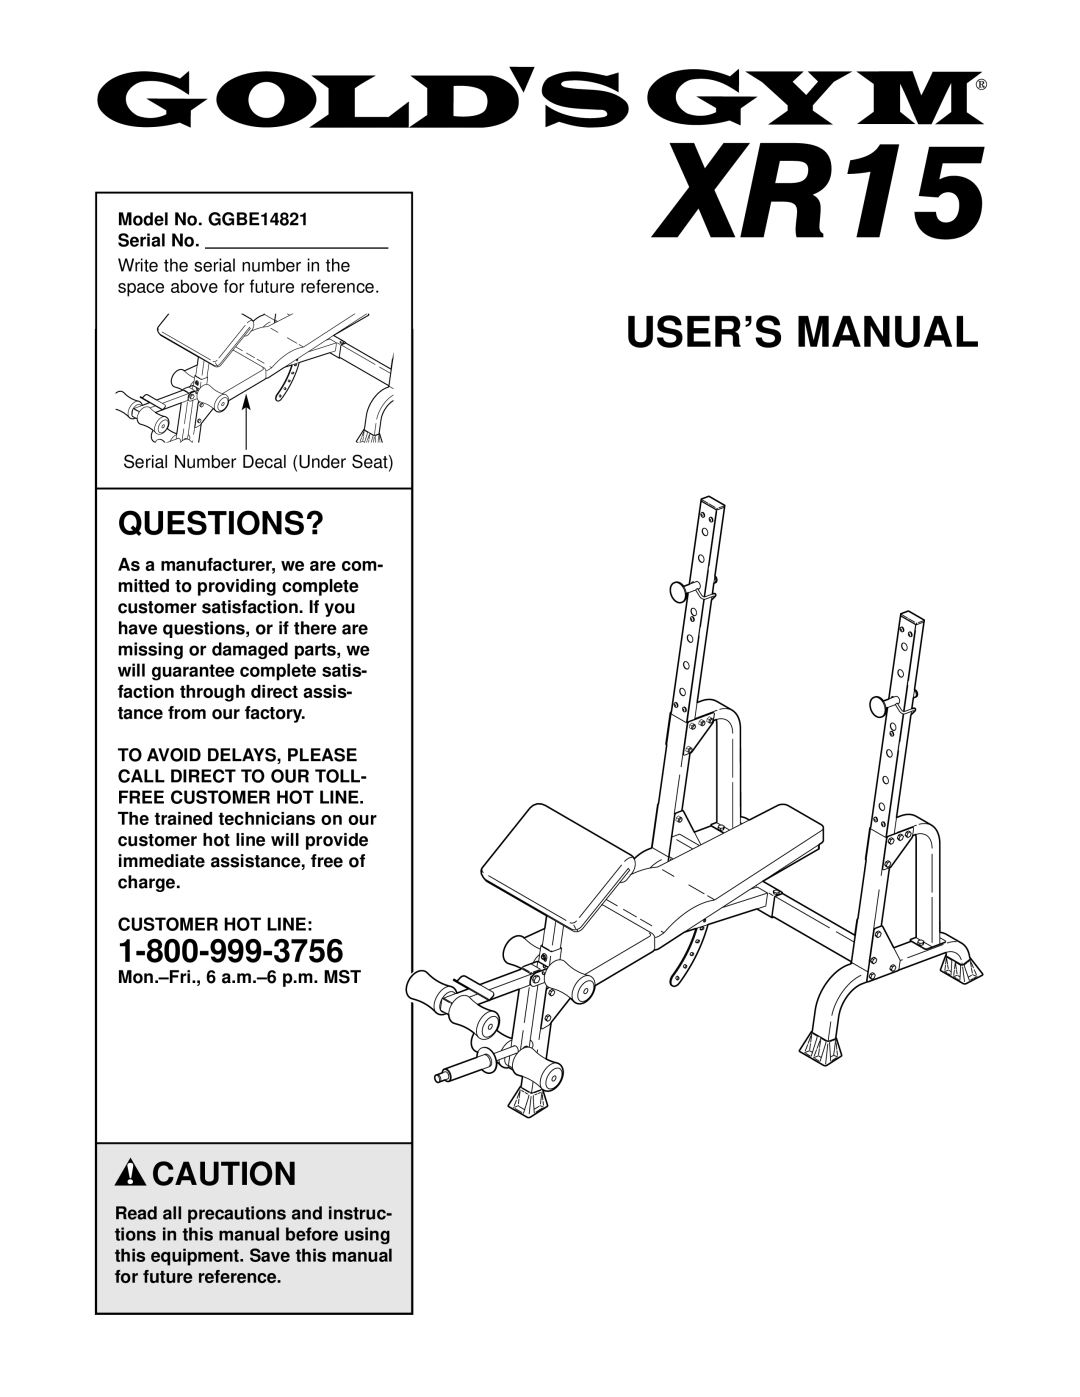 Gold's Gym XR15, GGBE14821 manual Questions?, User’S Manual 